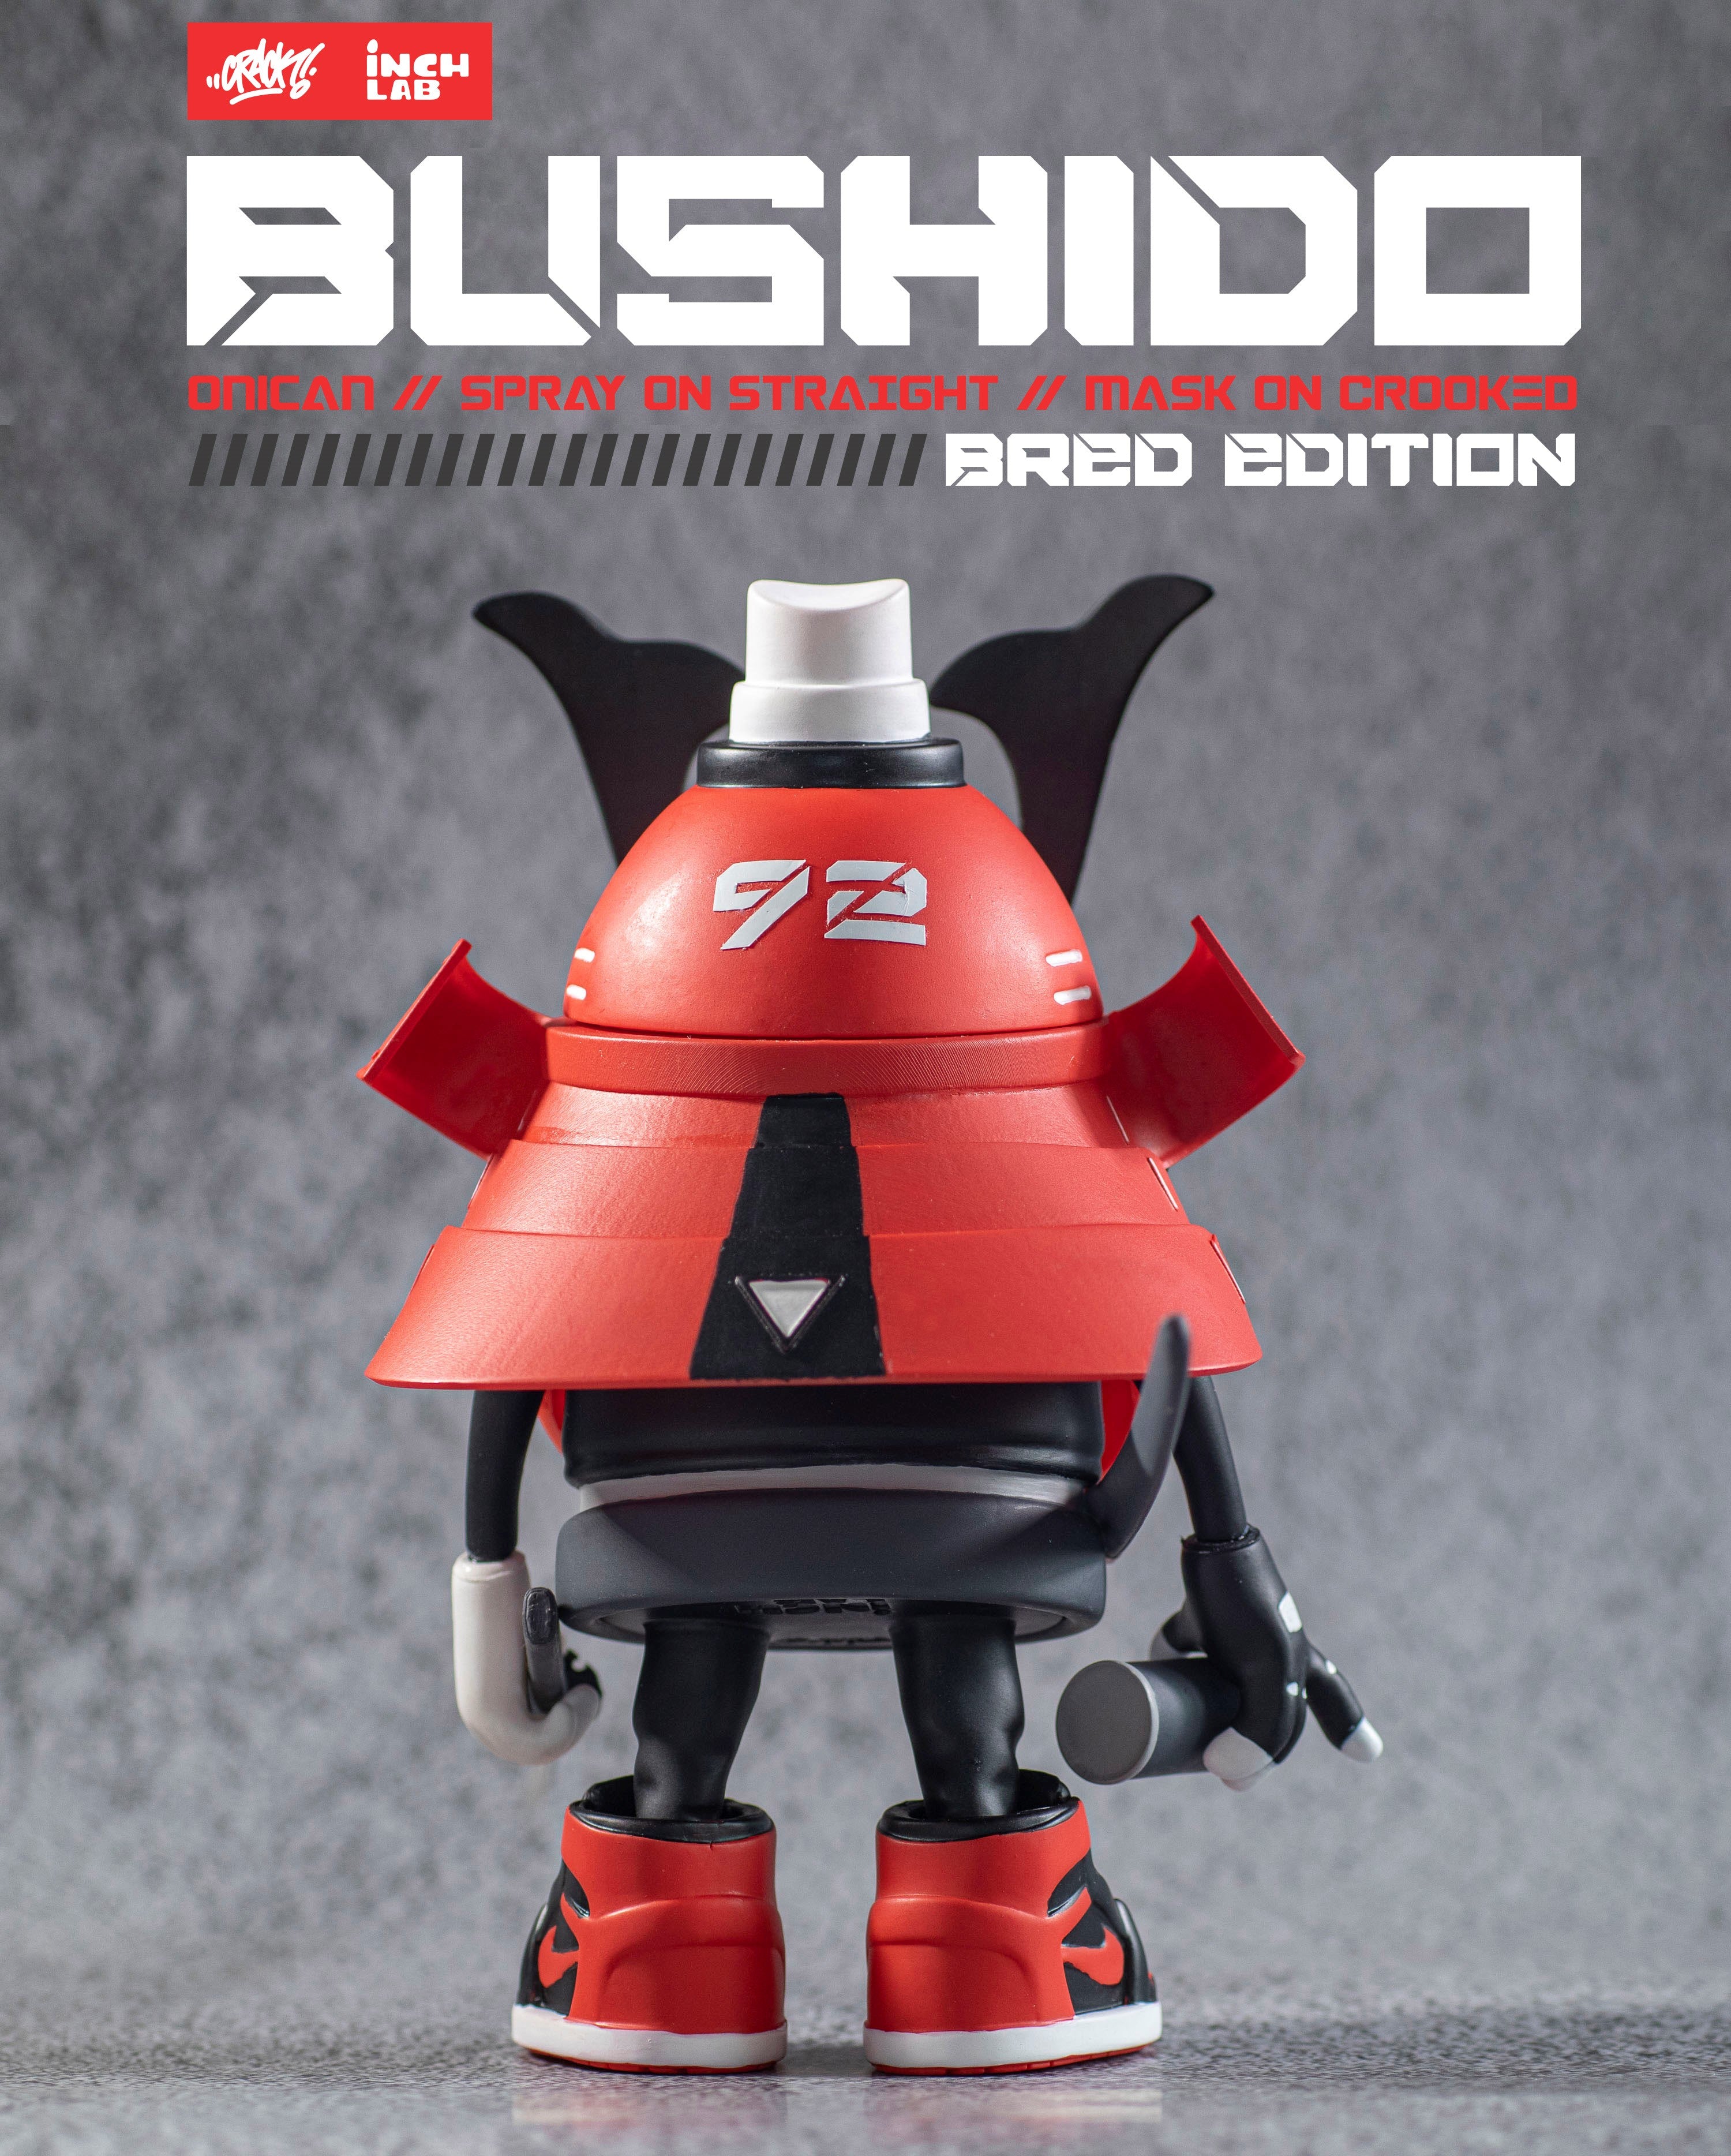 Bushido-Onican Bred Edition by Crack